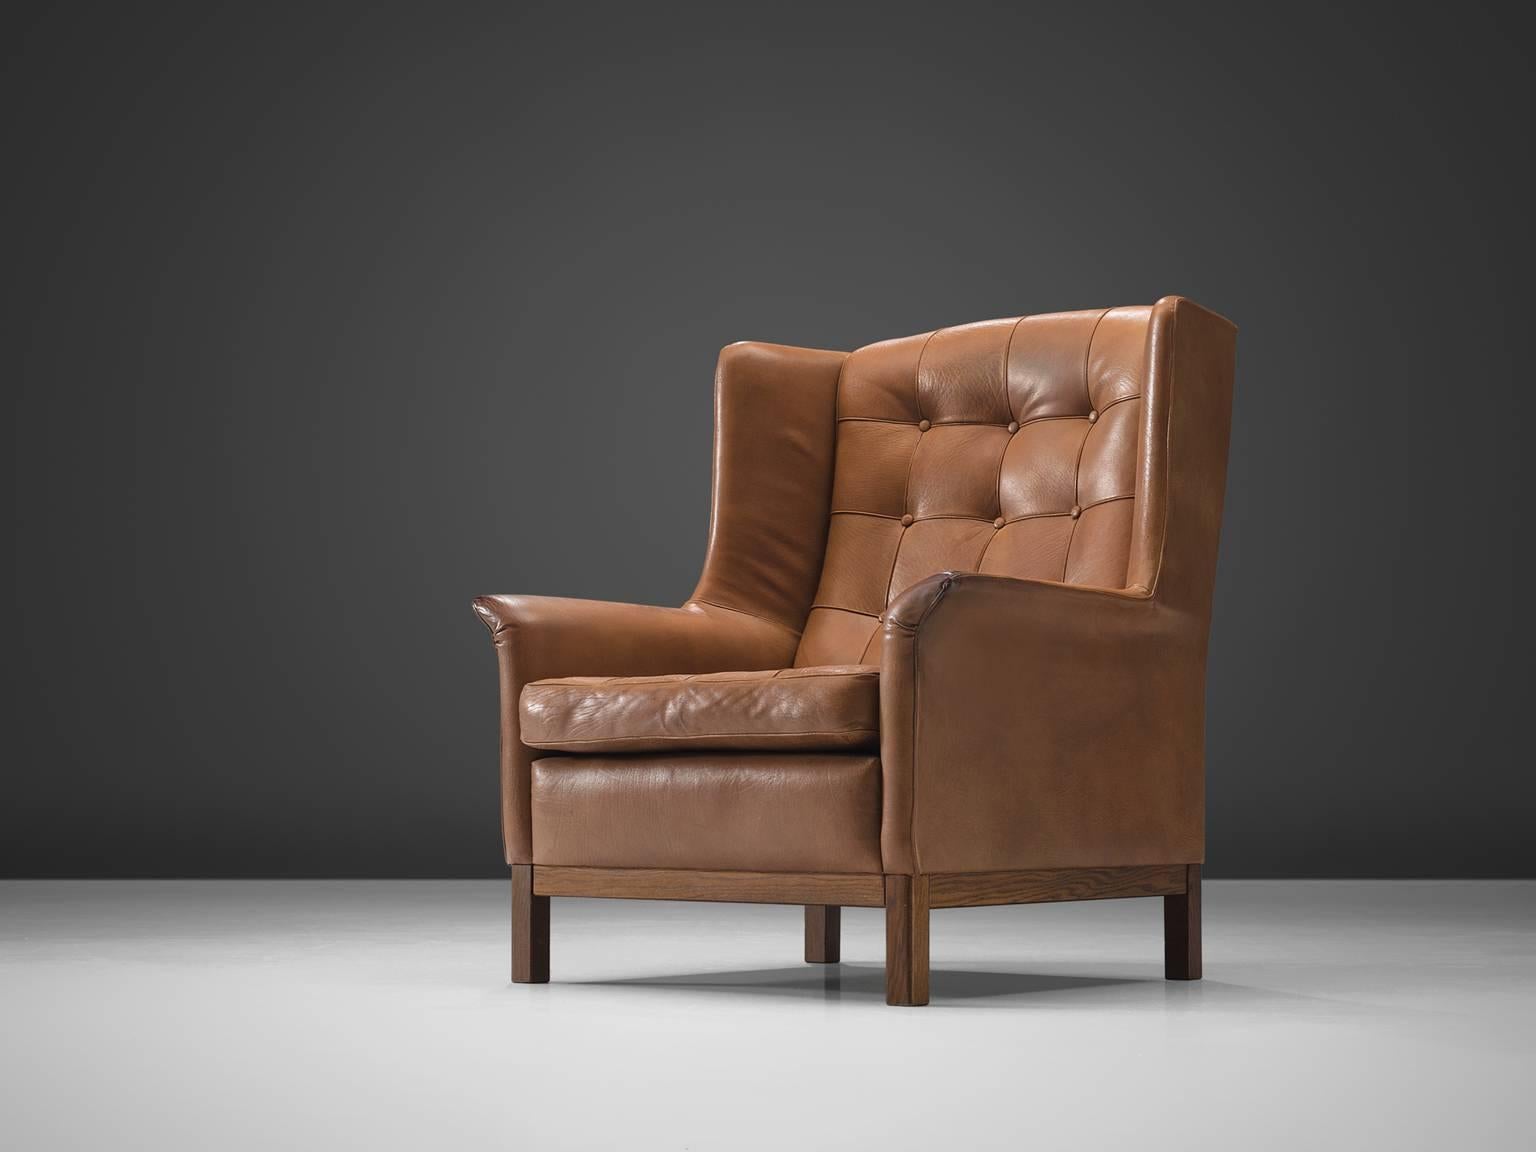 Arne Norell, high back chair, cognac leather and wood, Sweden, 1960s. 

Wonderful comfortable cognac buffalo leather easy chair by Swedish designer Arne Norell. This lounge chair comes with a very high standard of comfort, as where Norell is known